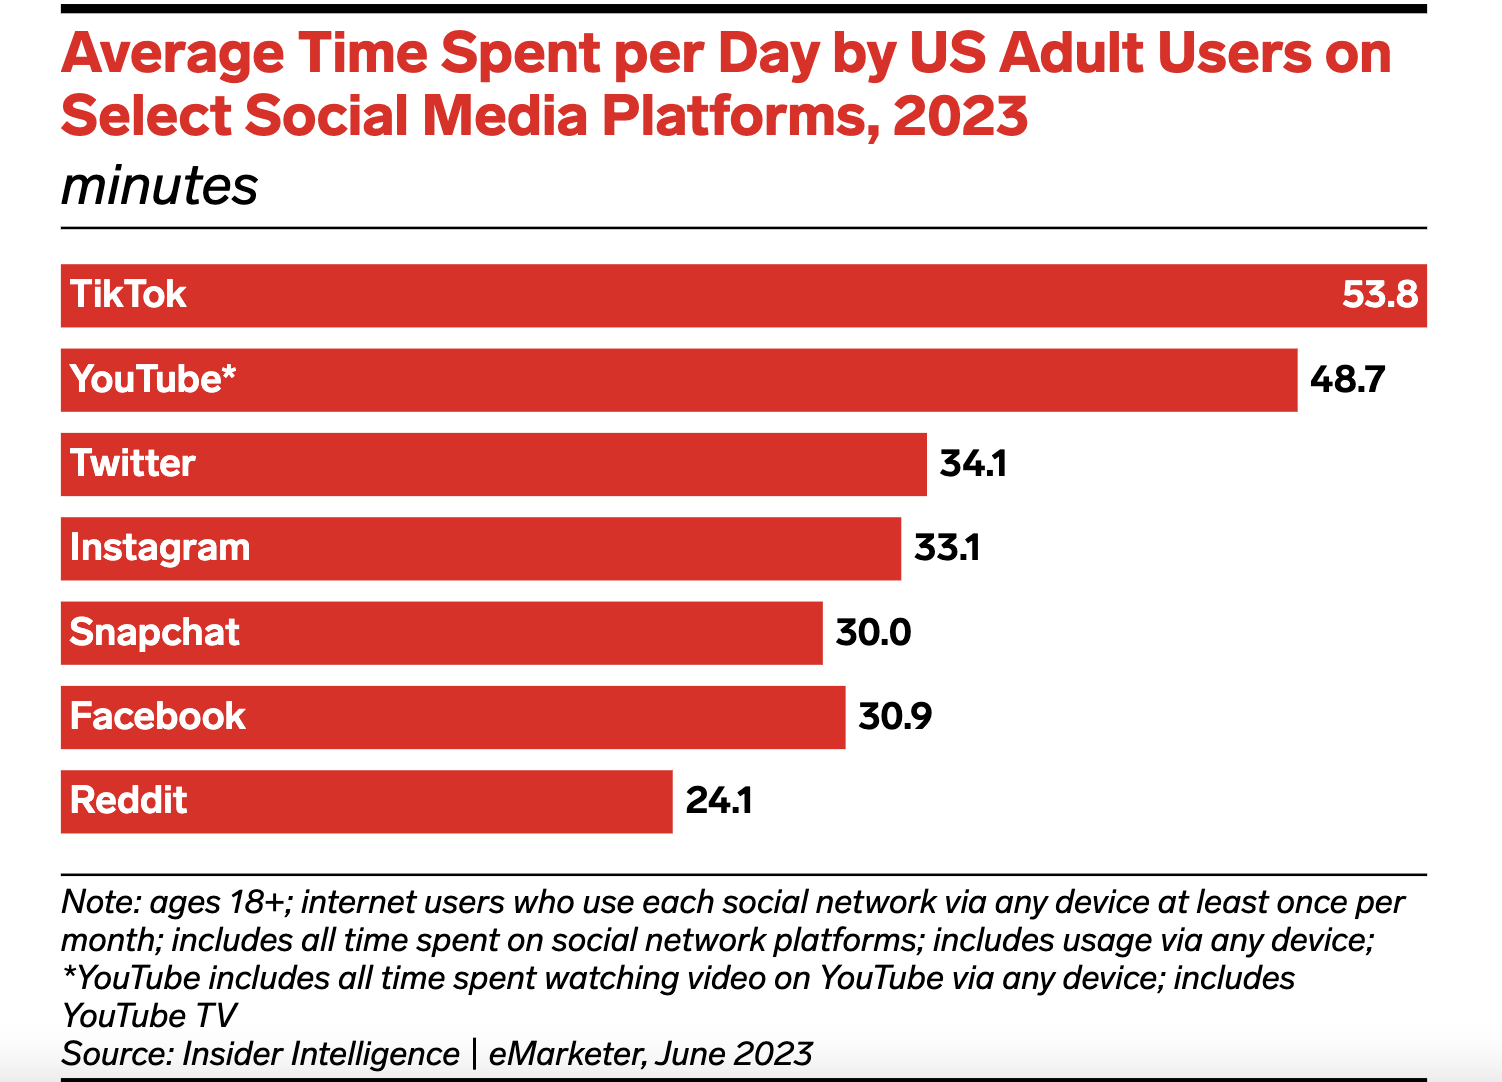 chart showing the average time spent per day by U.S adult users on various social networks